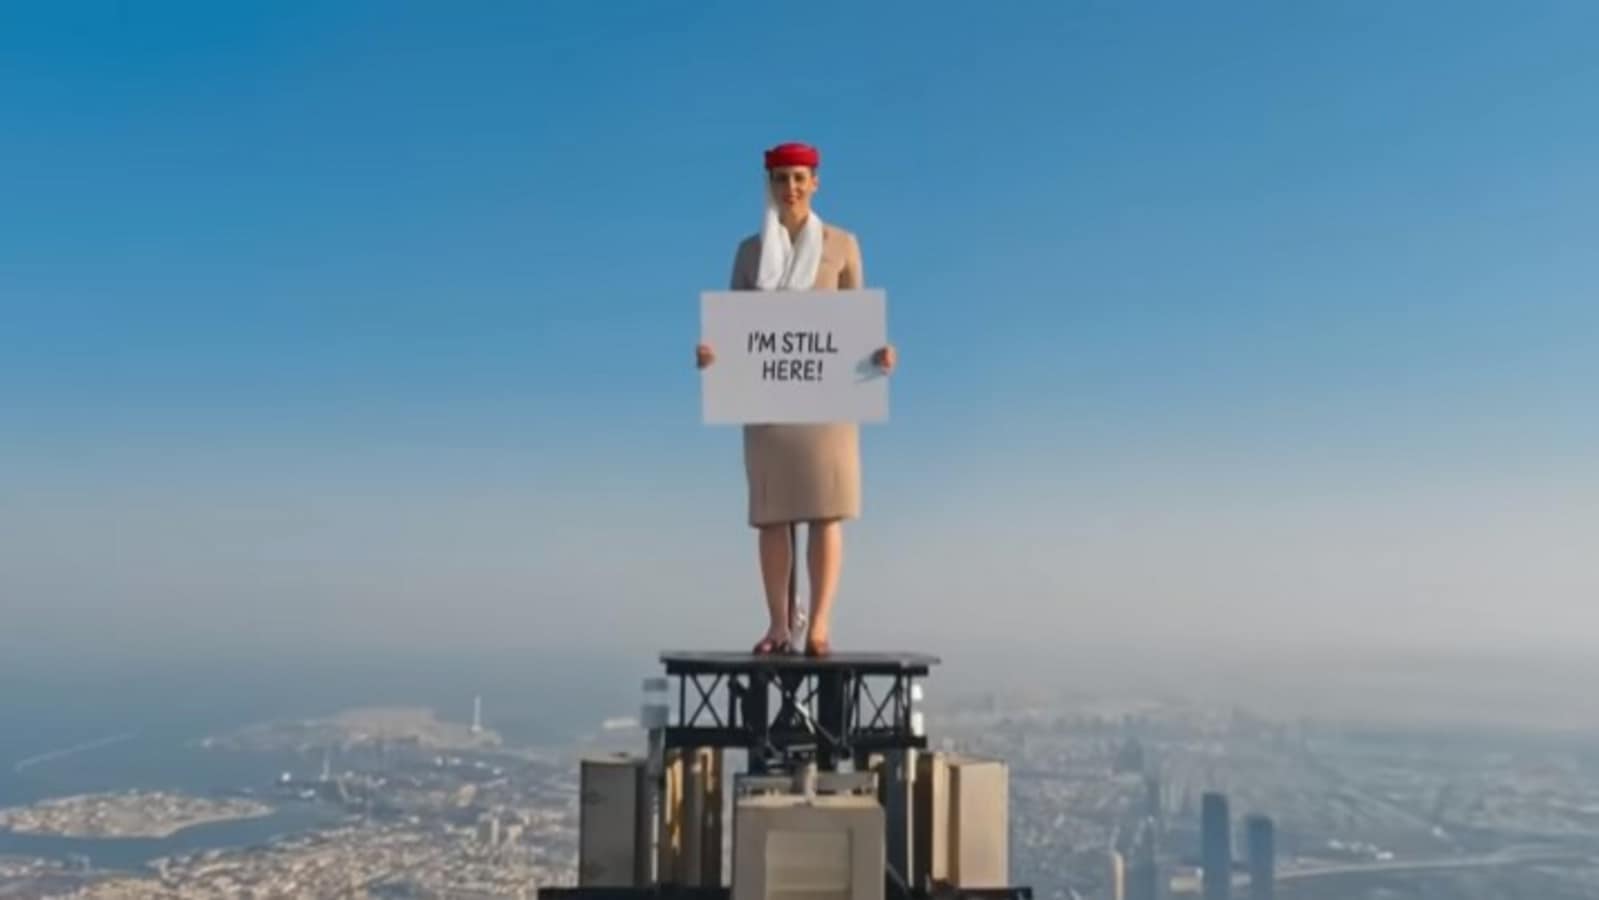 Burj Khalifa Is Nude Videos - Woman stands atop Burj Khalifa again in new Emirates ad. Video ends with a  twist | Trending - Hindustan Times